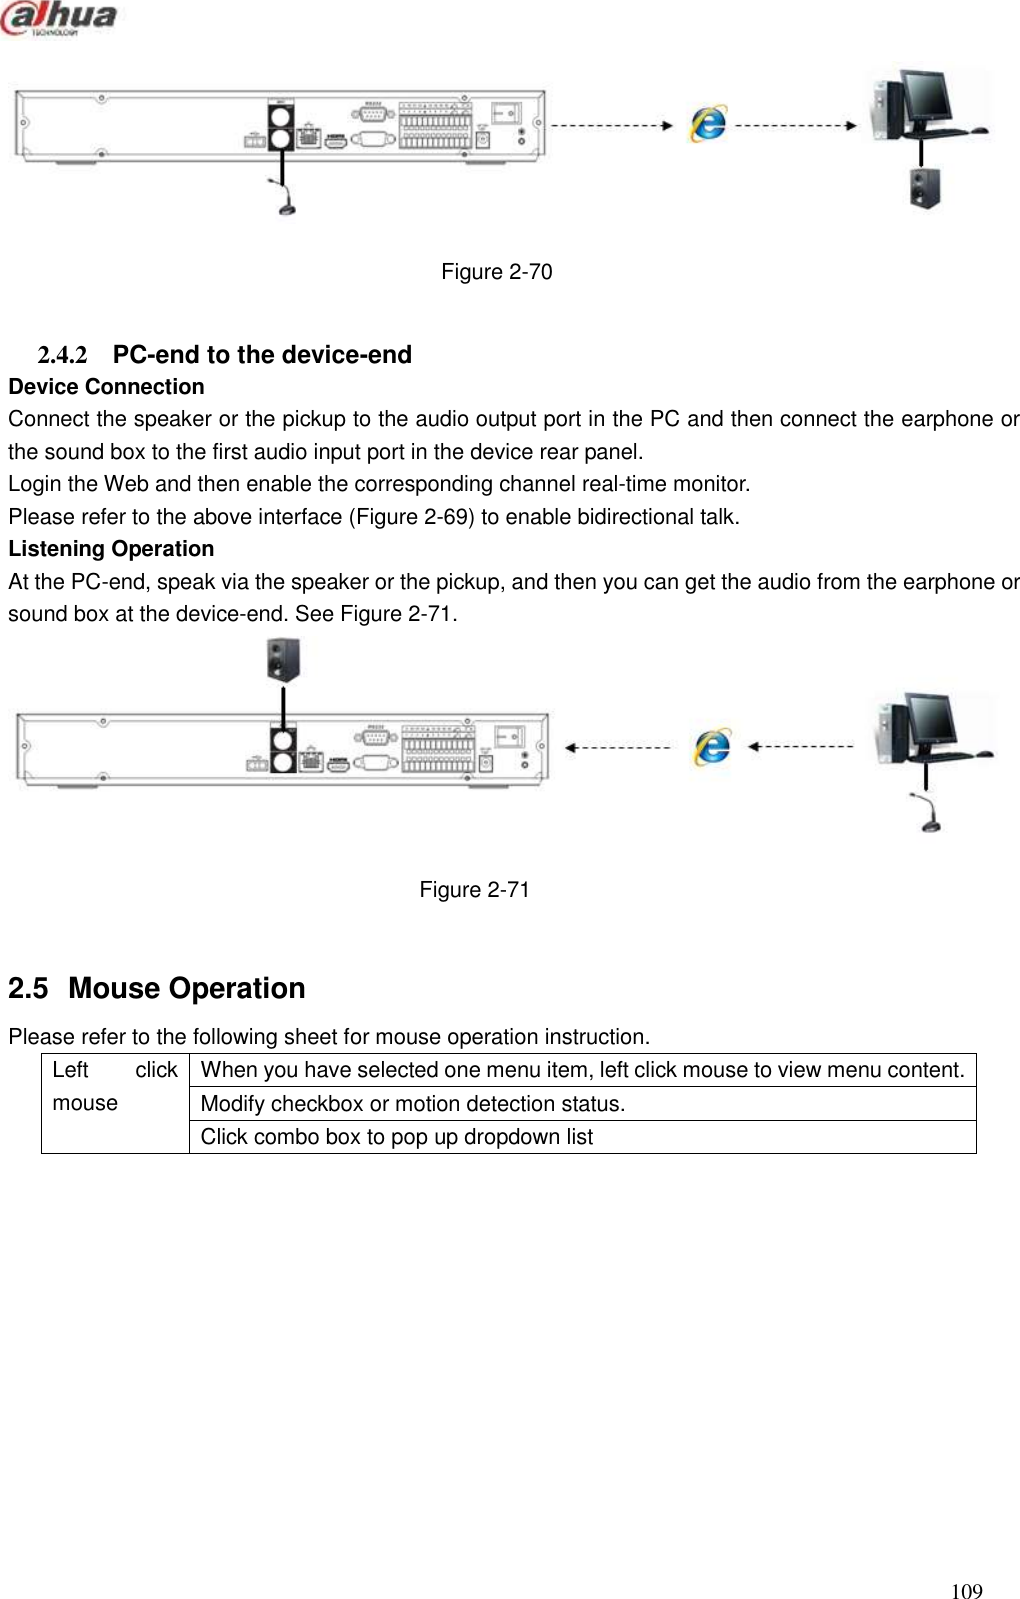  109   Figure 2-70  2.4.2 PC-end to the device-end Device Connection   Connect the speaker or the pickup to the audio output port in the PC and then connect the earphone or the sound box to the first audio input port in the device rear panel. Login the Web and then enable the corresponding channel real-time monitor.   Please refer to the above interface (Figure 2-69) to enable bidirectional talk.   Listening Operation At the PC-end, speak via the speaker or the pickup, and then you can get the audio from the earphone or sound box at the device-end. See Figure 2-71.  Figure 2-71  2.5  Mouse Operation   Please refer to the following sheet for mouse operation instruction.   Left  click mouse When you have selected one menu item, left click mouse to view menu content. Modify checkbox or motion detection status. Click combo box to pop up dropdown list 